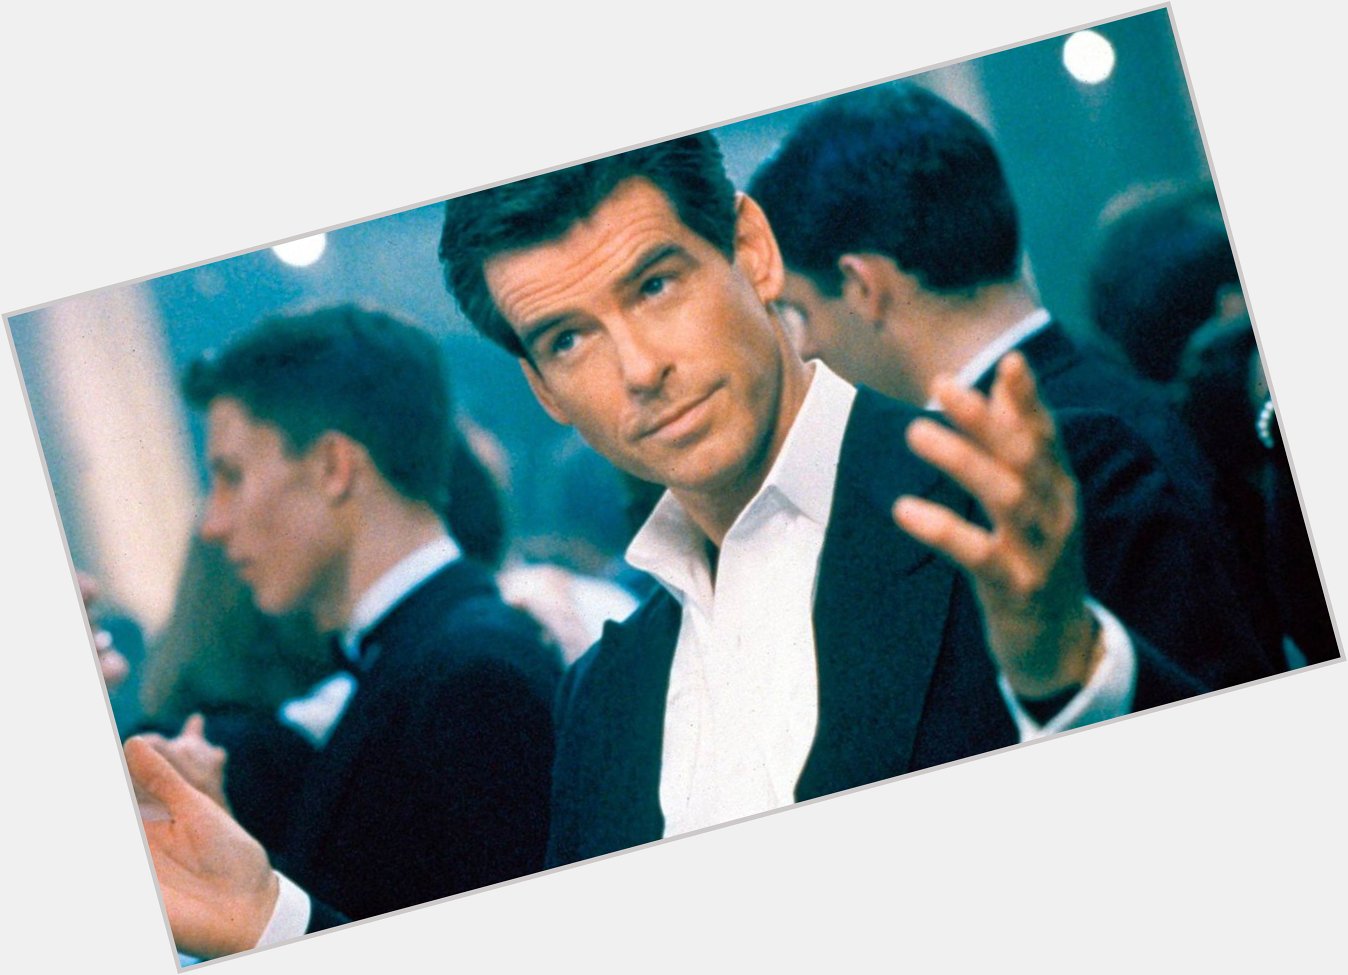 Happy birthday to Pierce Brosnan, who brings me so much joy in whatever role he s in. 